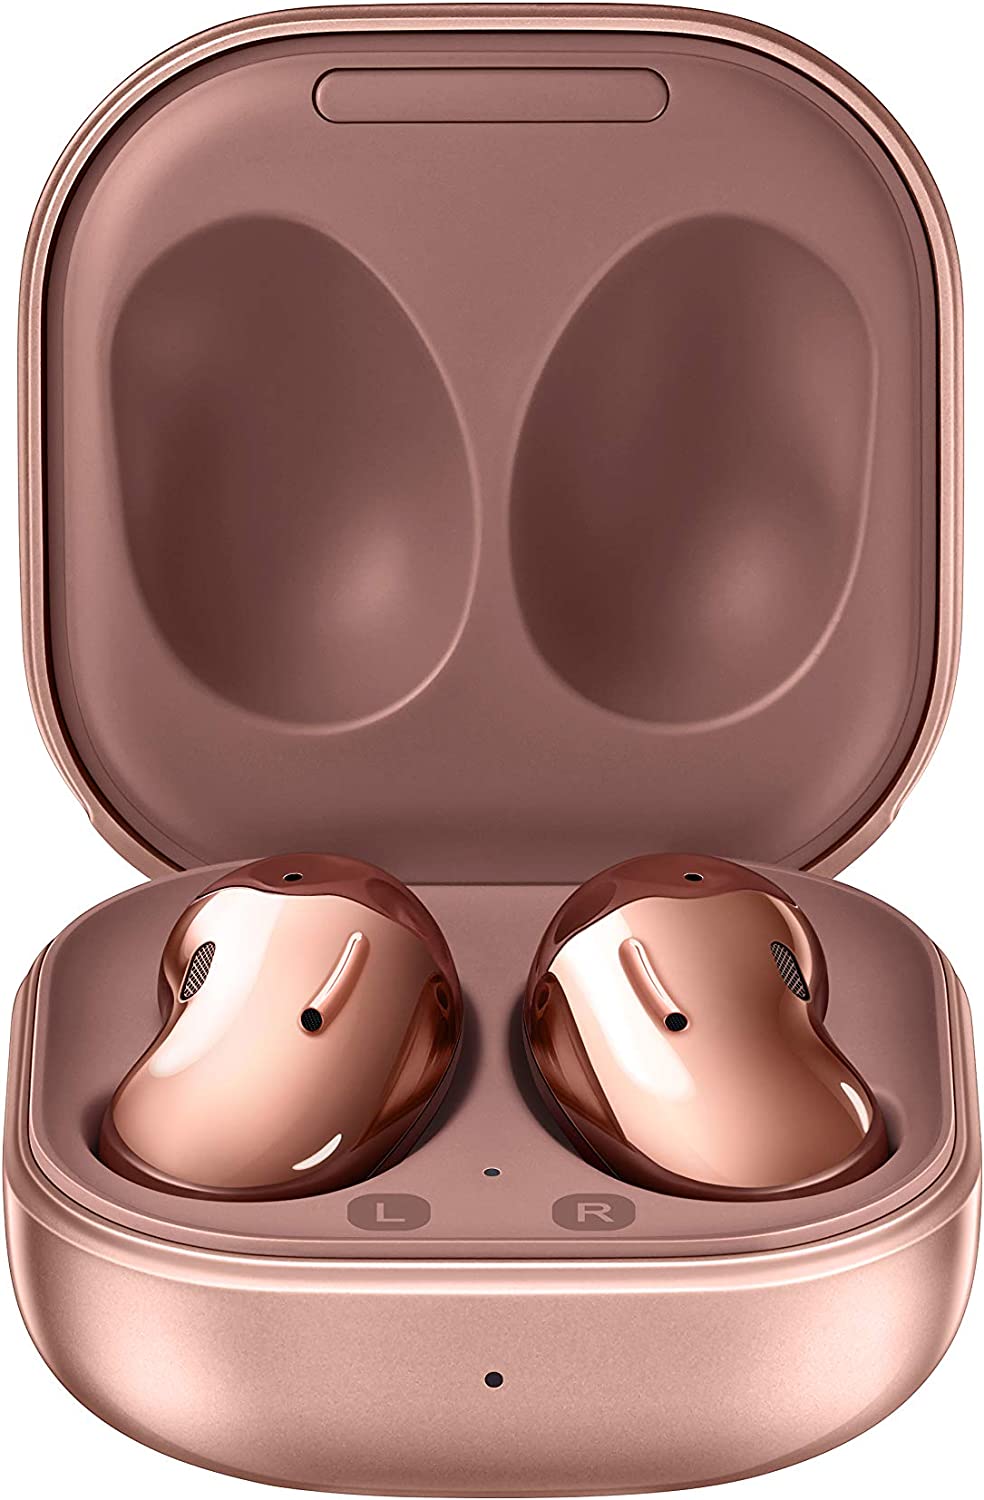 what-are-the-best-noise-cancelling-headphones-for-travel